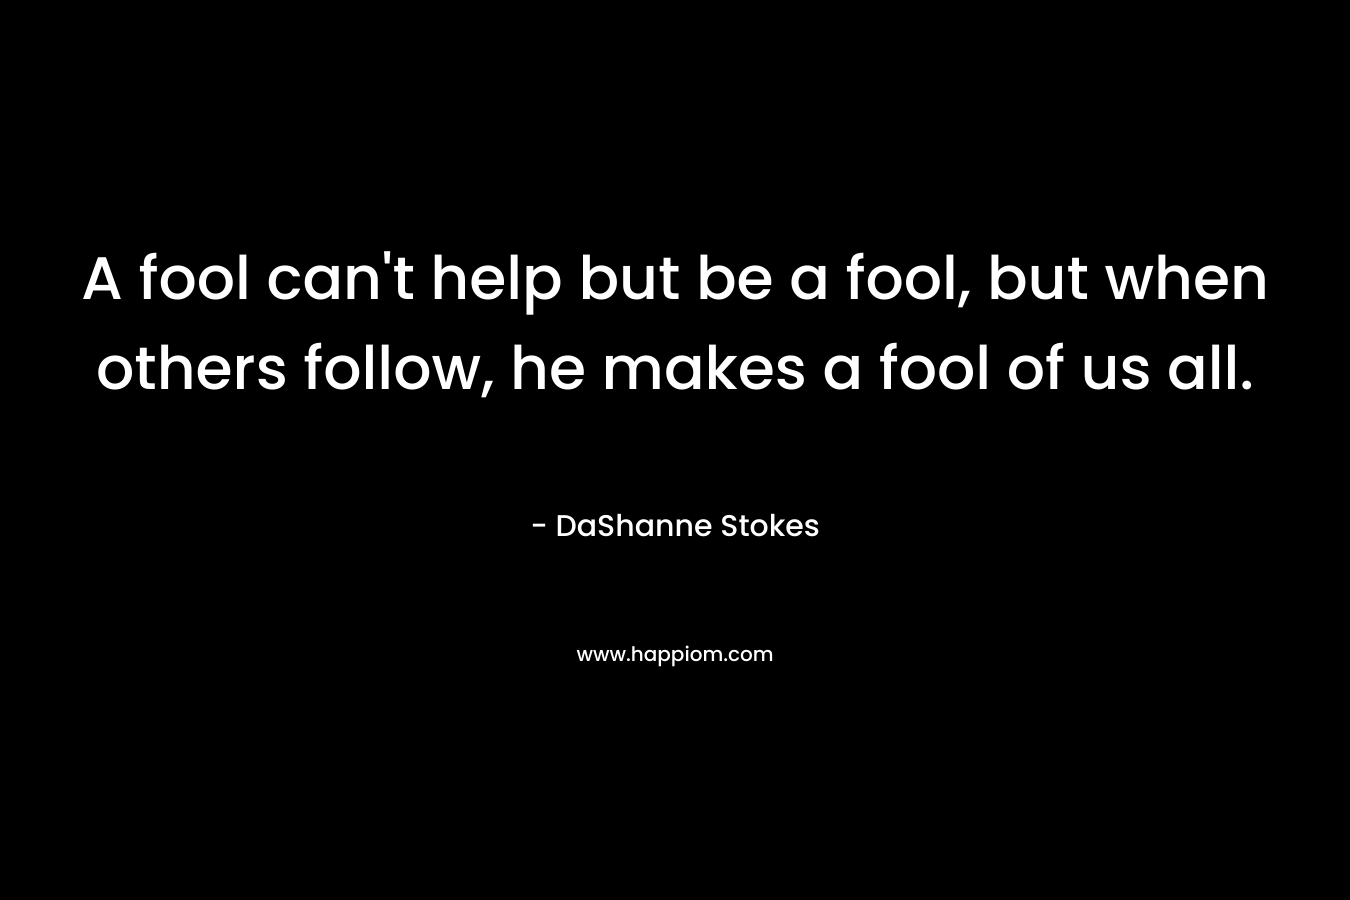 A fool can't help but be a fool, but when others follow, he makes a fool of us all.